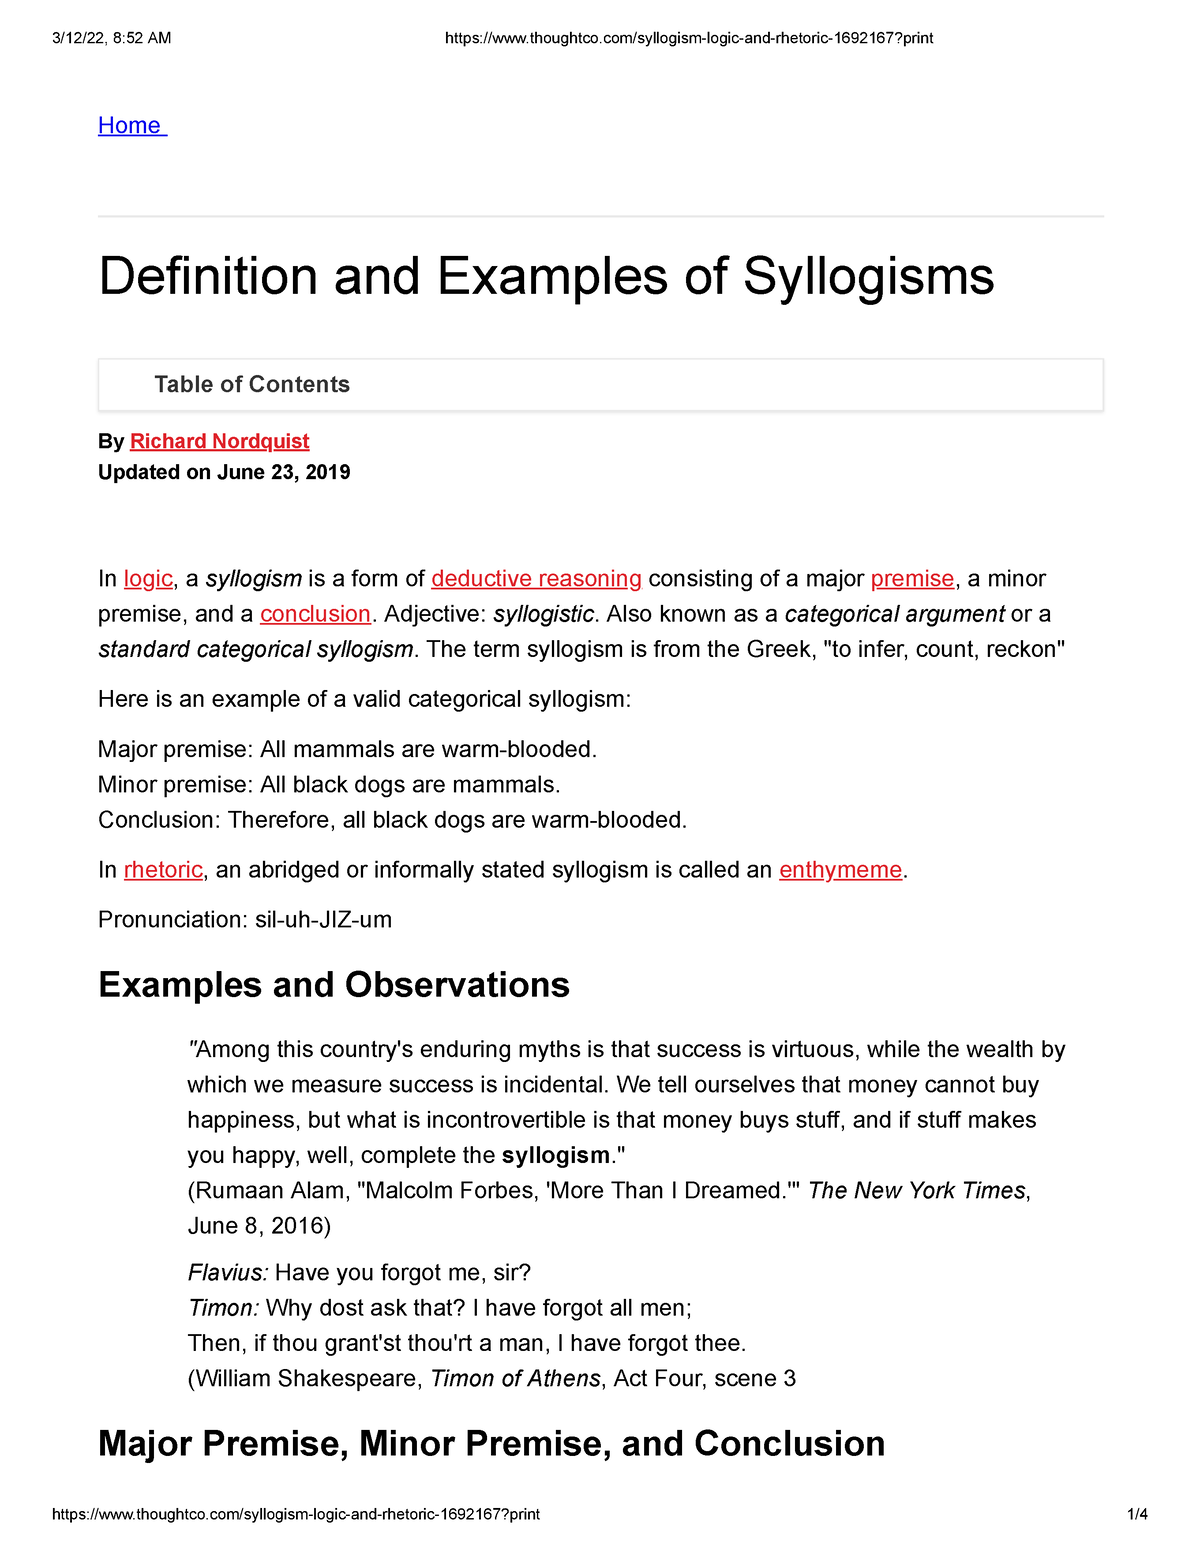 Syllogism logic and rhetoric - Home Definition and Examples of ...